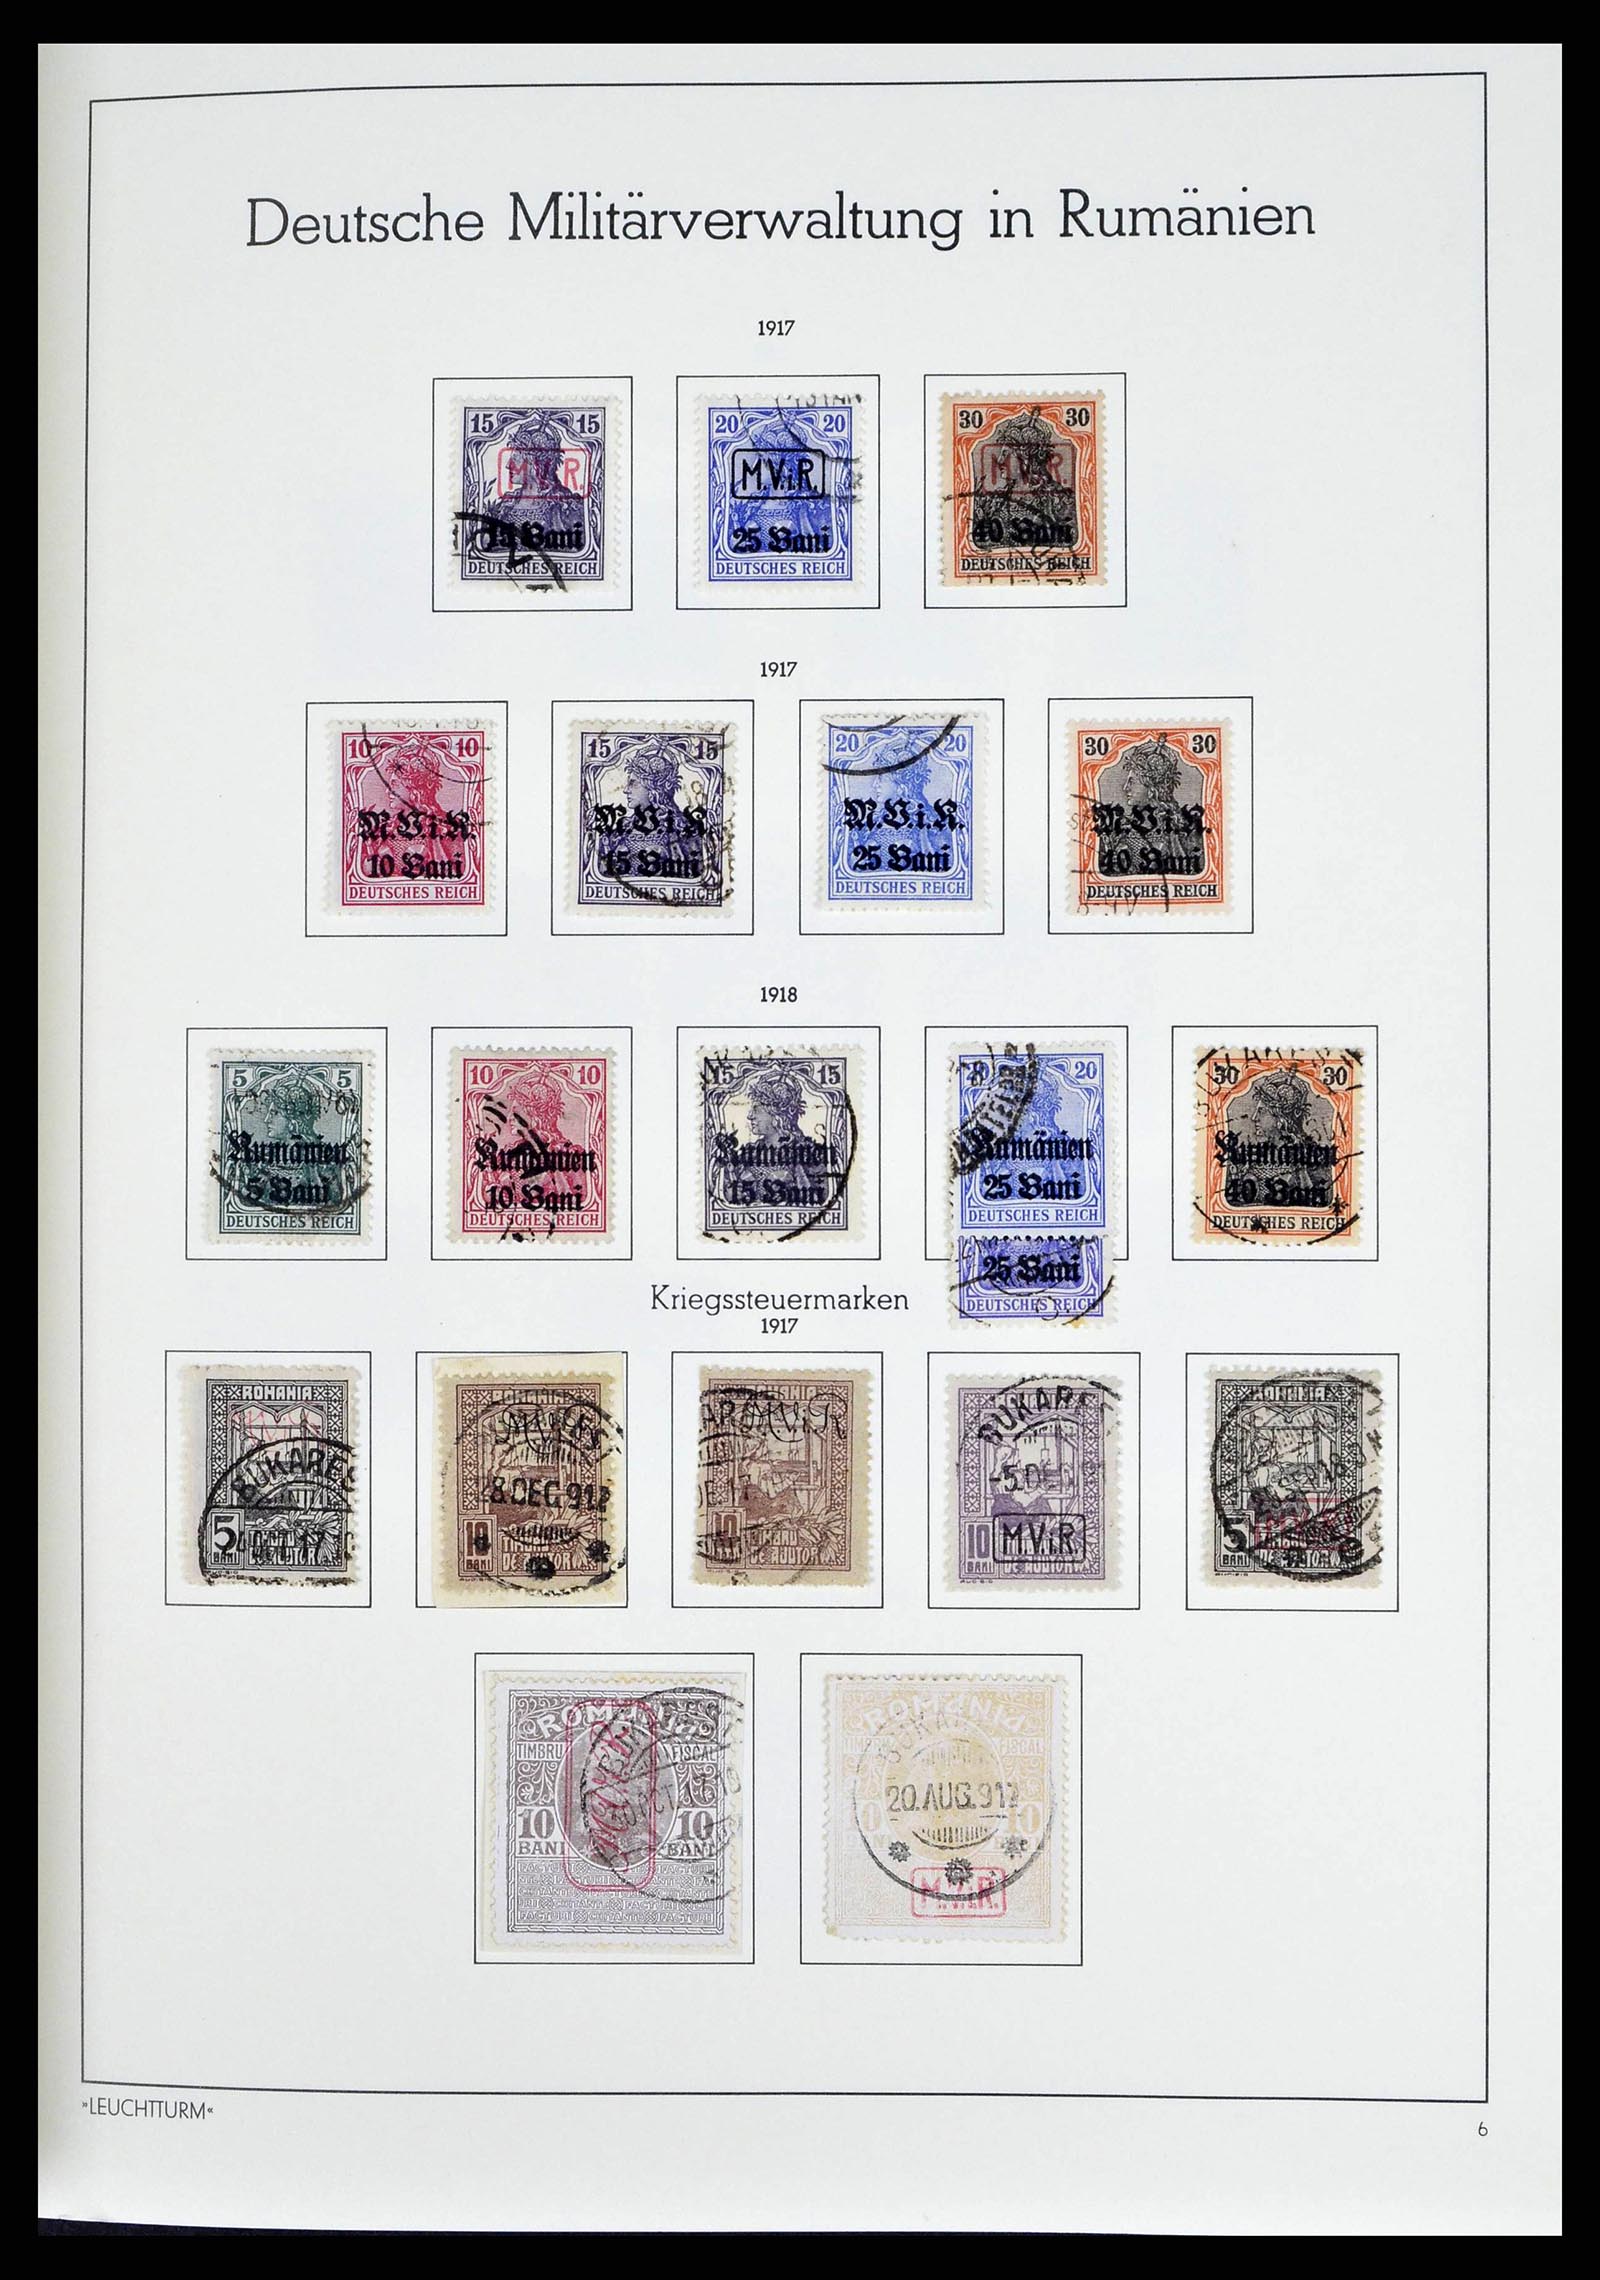 38501 0021 - Stamp collection 38501 German territories and occupations 1920-1945.